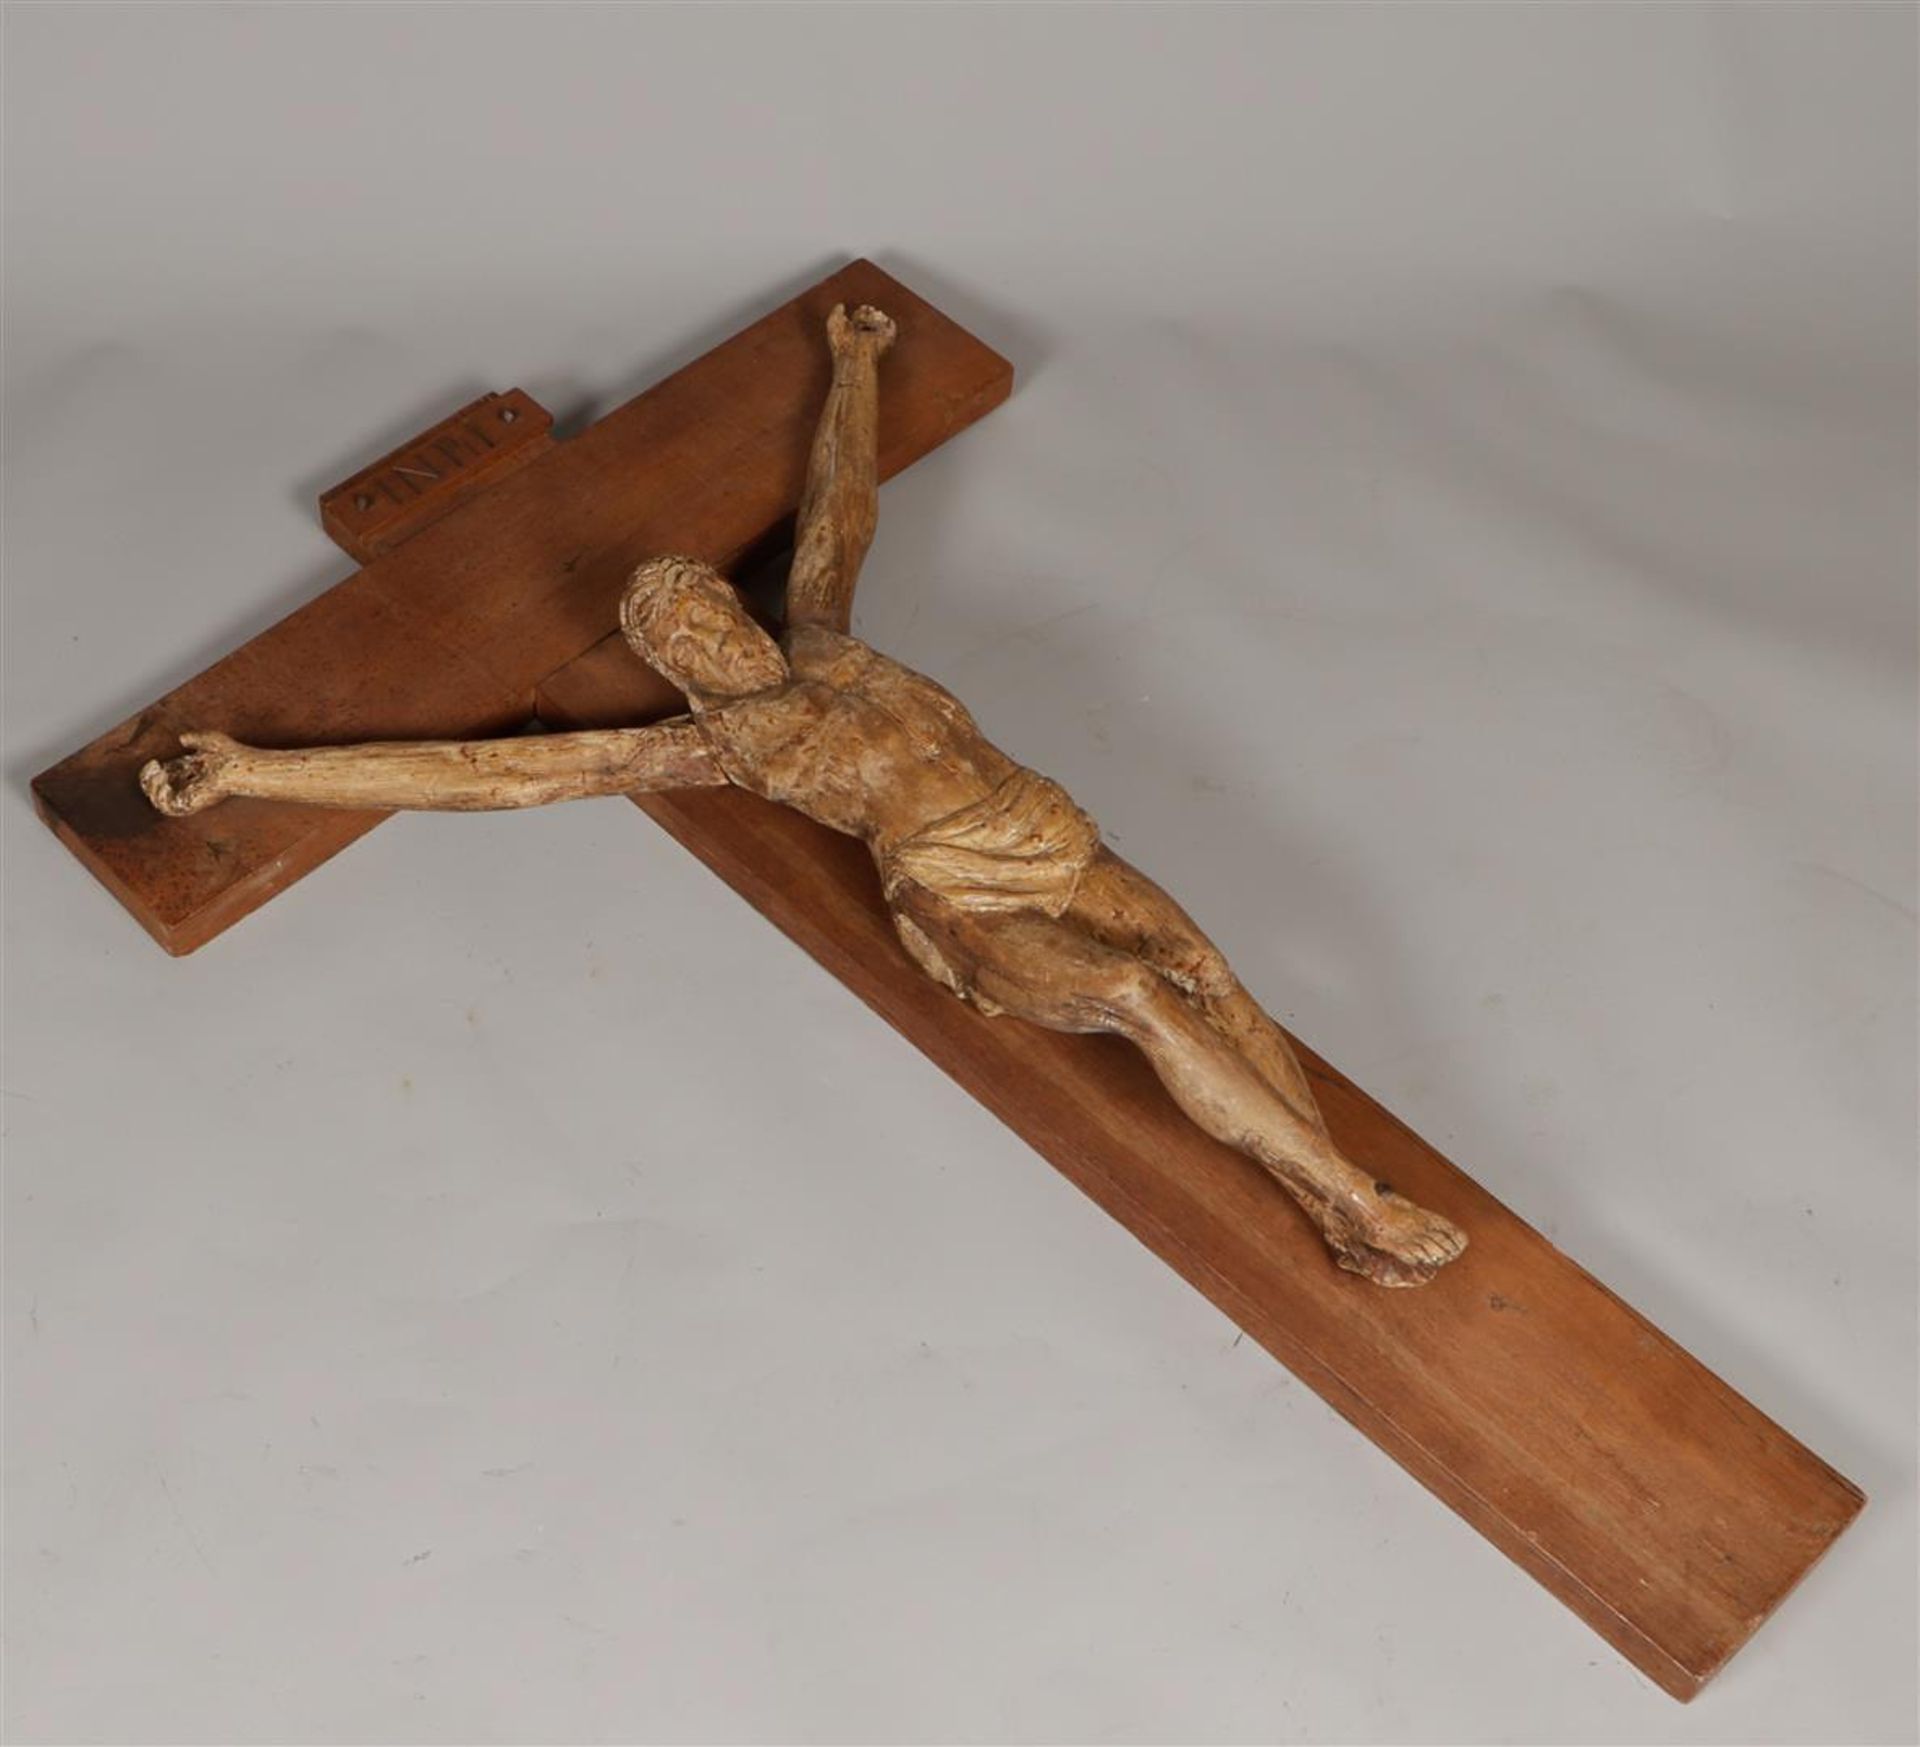 A large wooden Corpus ca. 1800, mounted on a later crucifix.